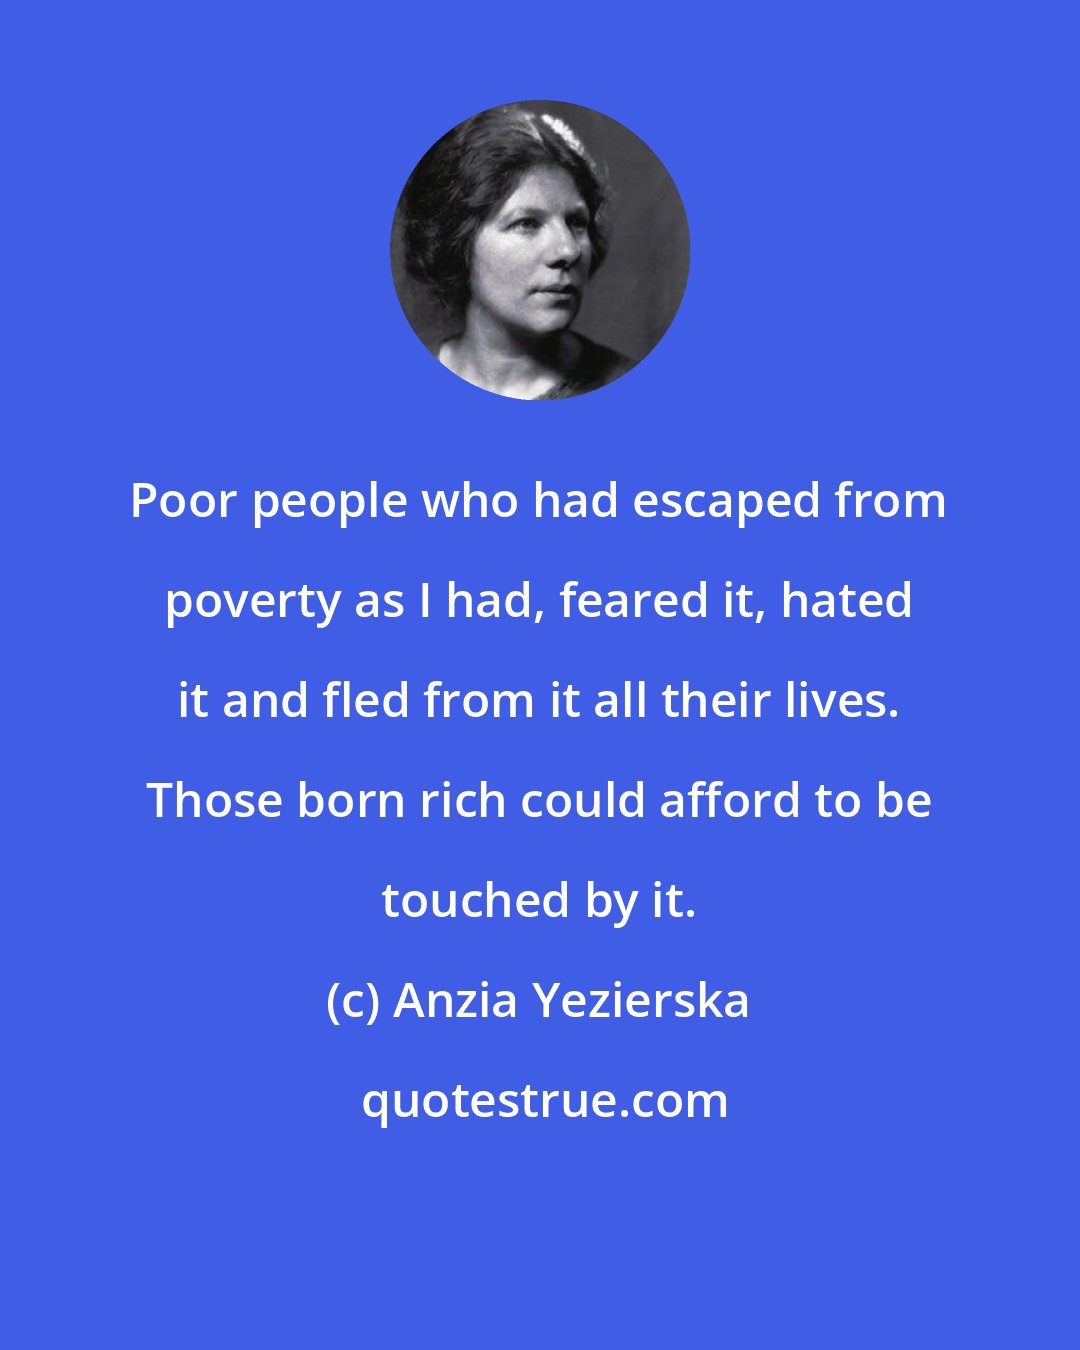 Anzia Yezierska: Poor people who had escaped from poverty as I had, feared it, hated it and fled from it all their lives. Those born rich could afford to be touched by it.